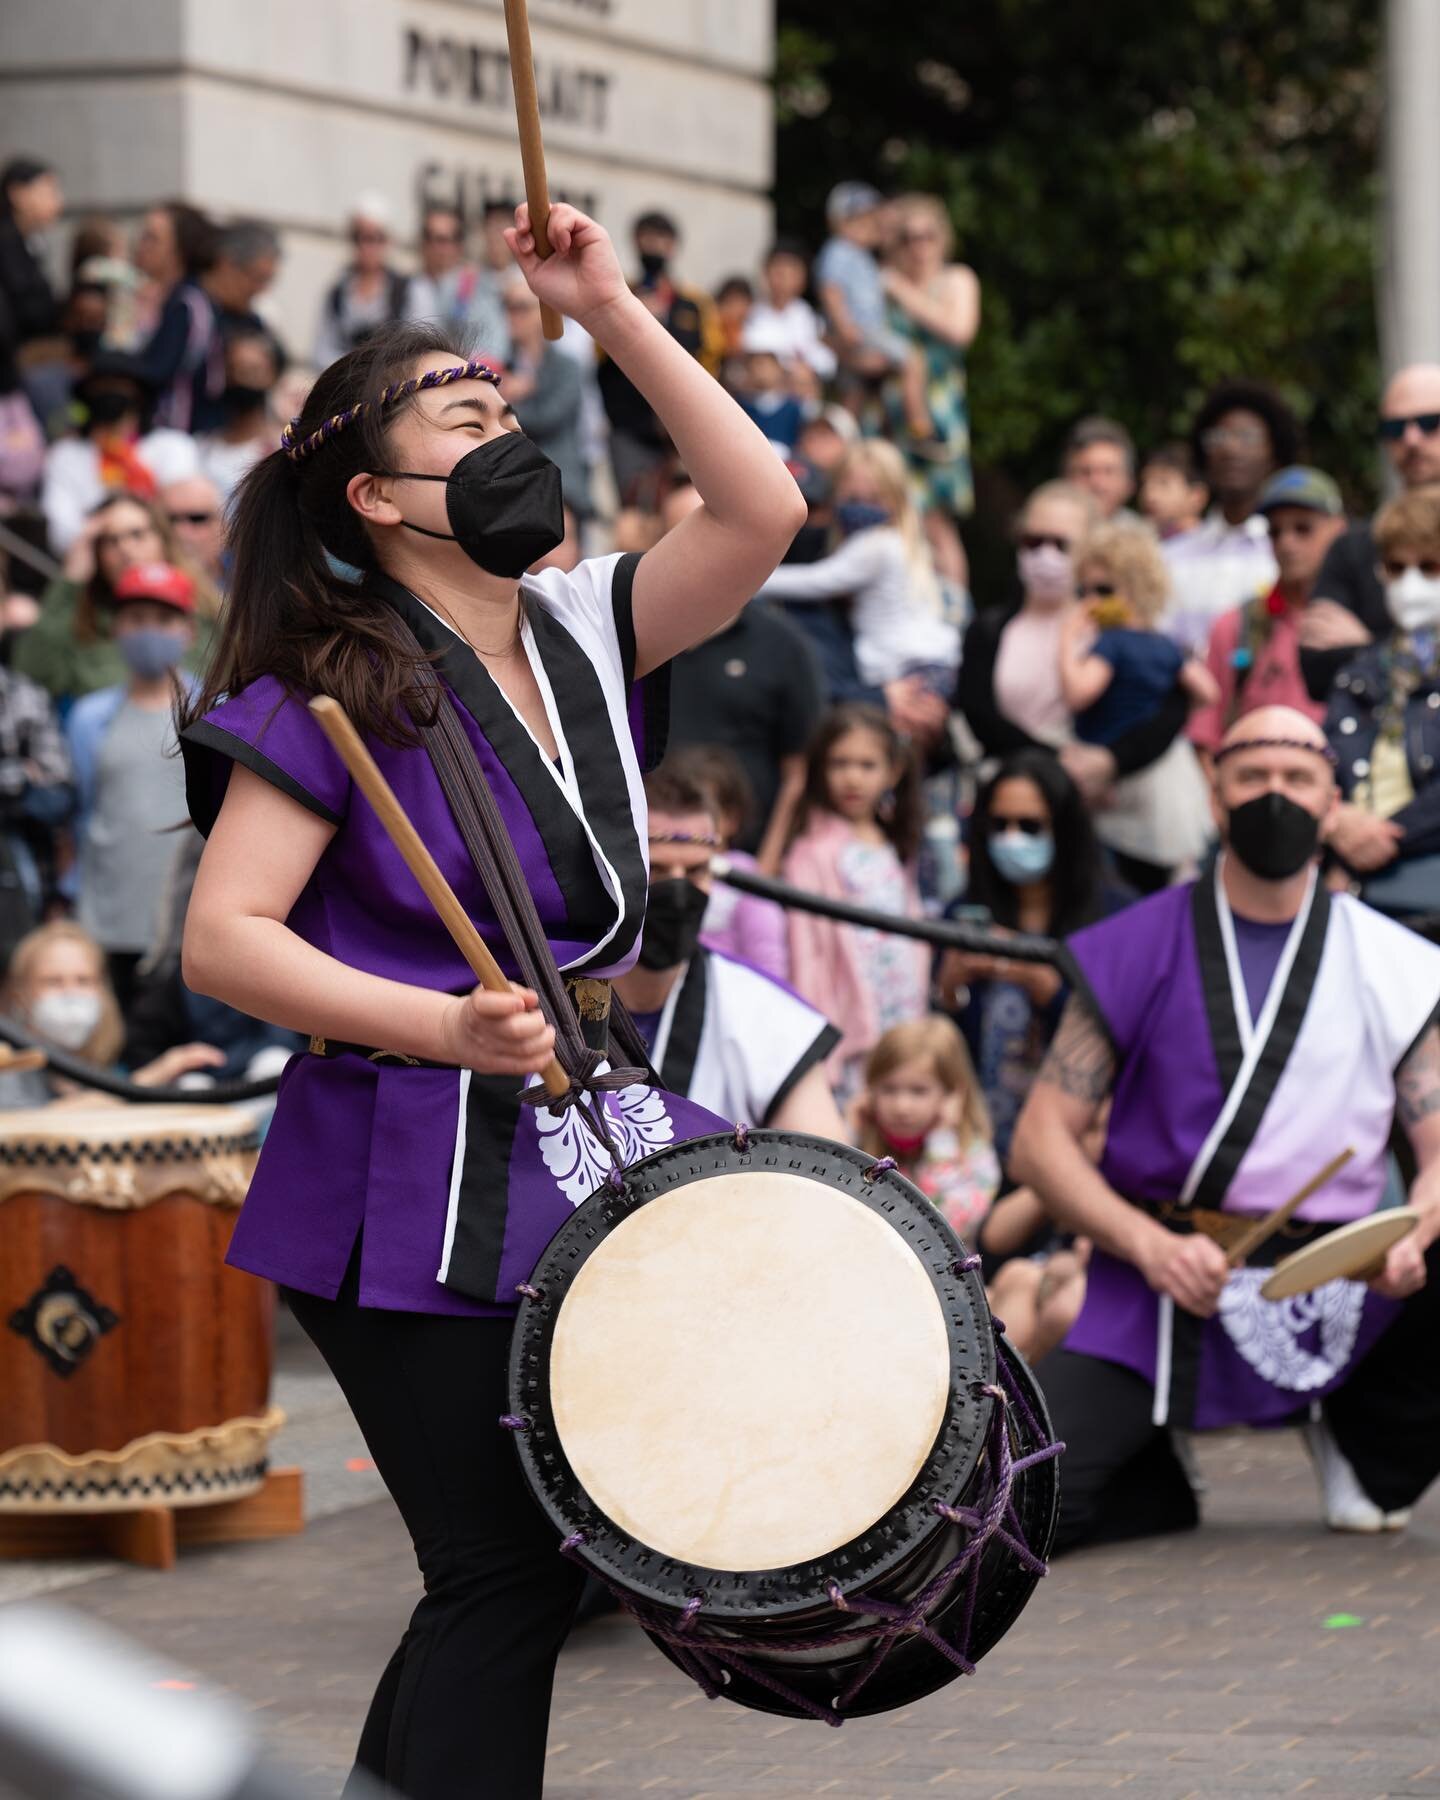 The blossoms downtown look amazing and while you&rsquo;re in DC, come by SAAM (the Smithsonian @americanart Museum) and check out the amazing Nen Daiko drummers at the Cherry Blossom Family Celebration tomorrow, March 25th, from 11:30am-3pm. The cele